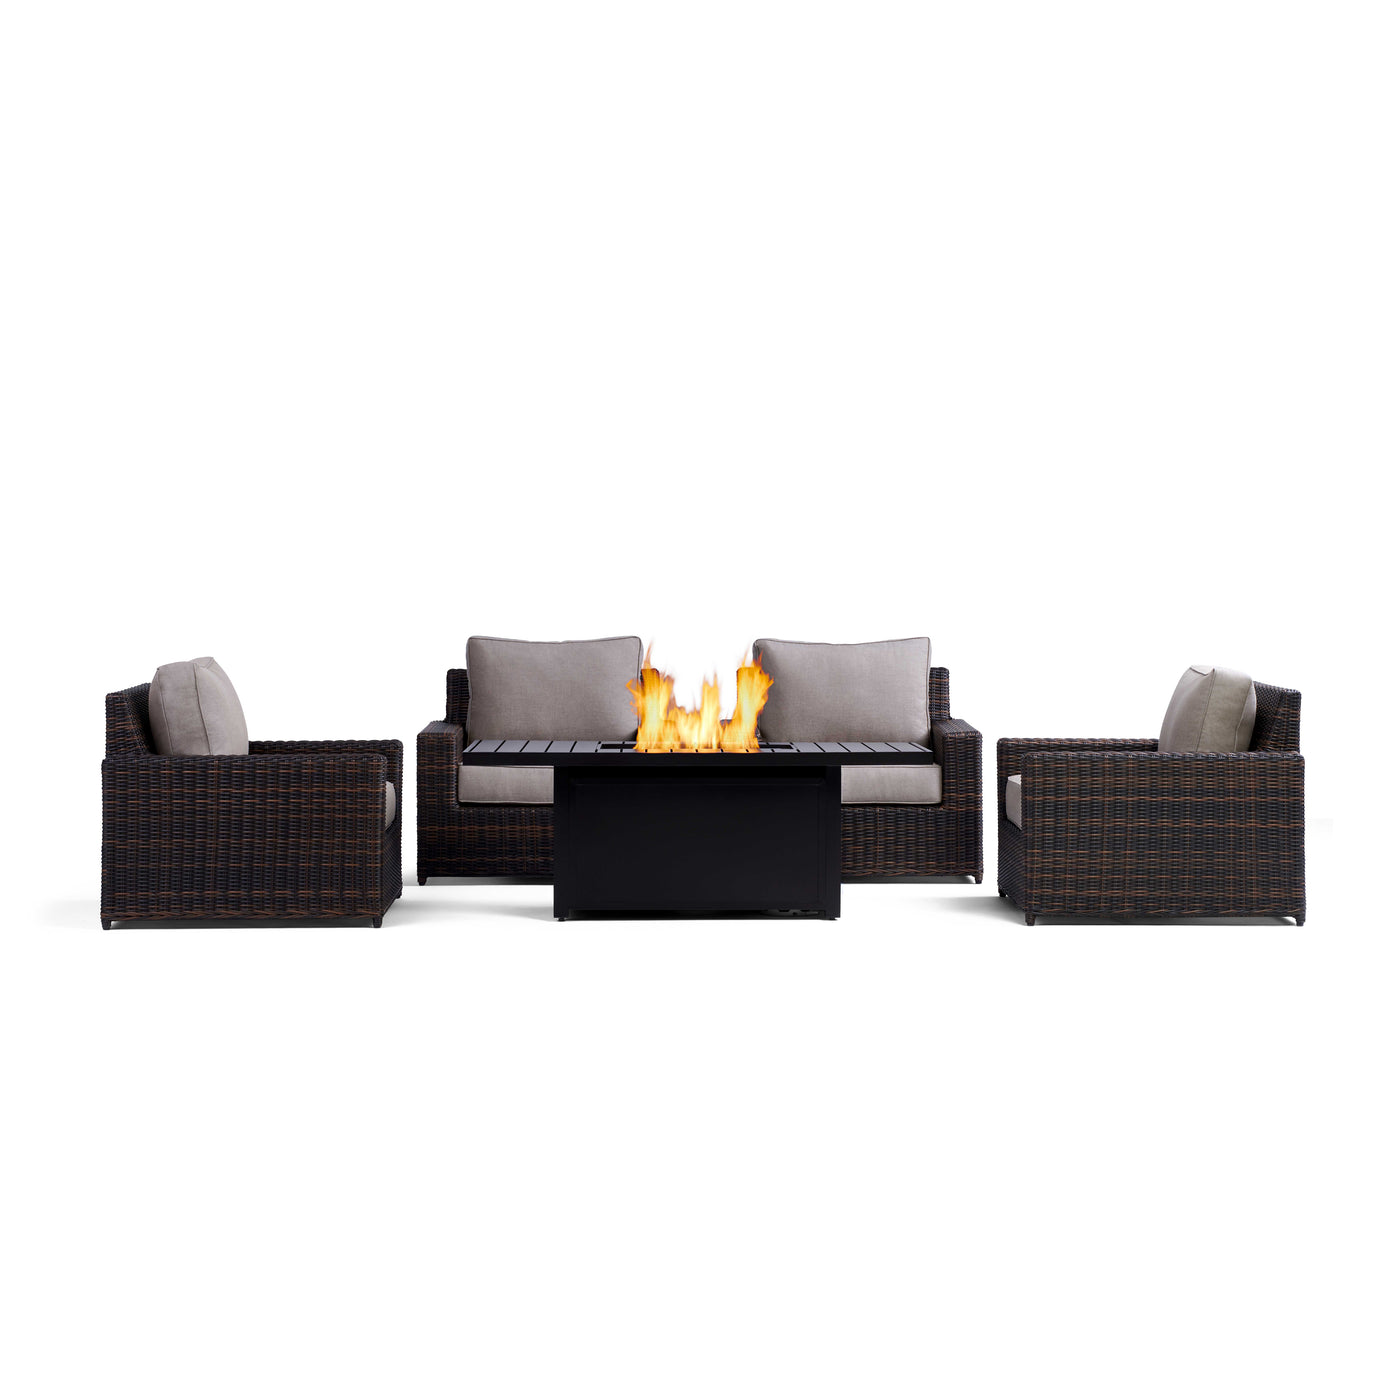  Yardbird Langdon Outdoor Fire Pit Table Set with 4 Fixed Chairs Outdoor Furniture